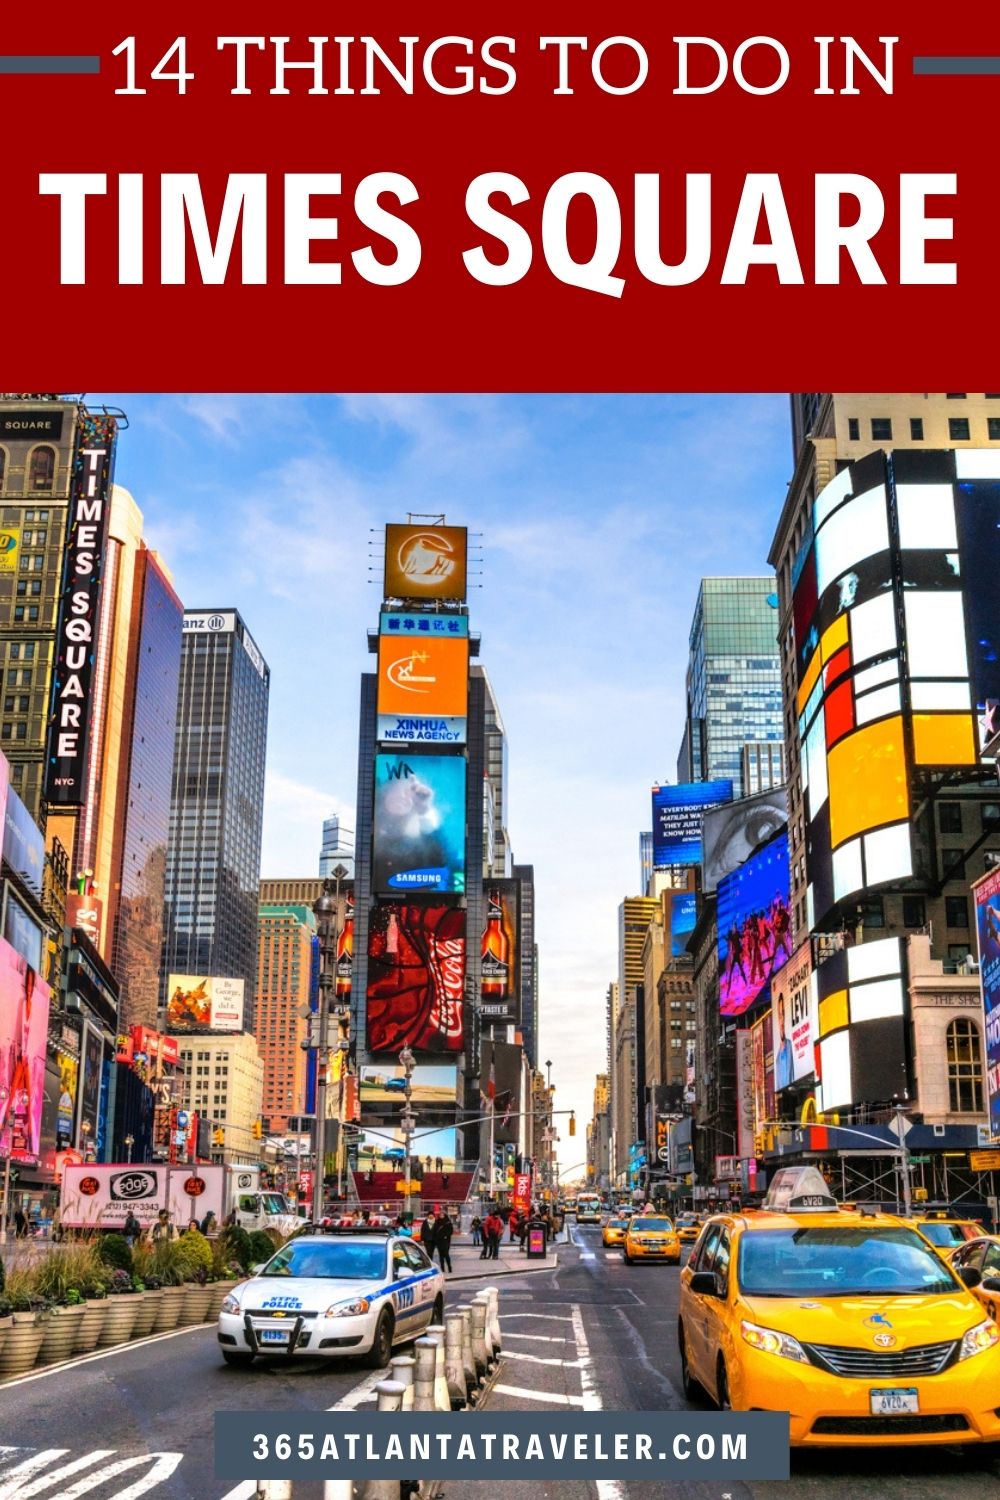 14 REALLY AMAZING THINGS TO DO IN TIMES SQUARE